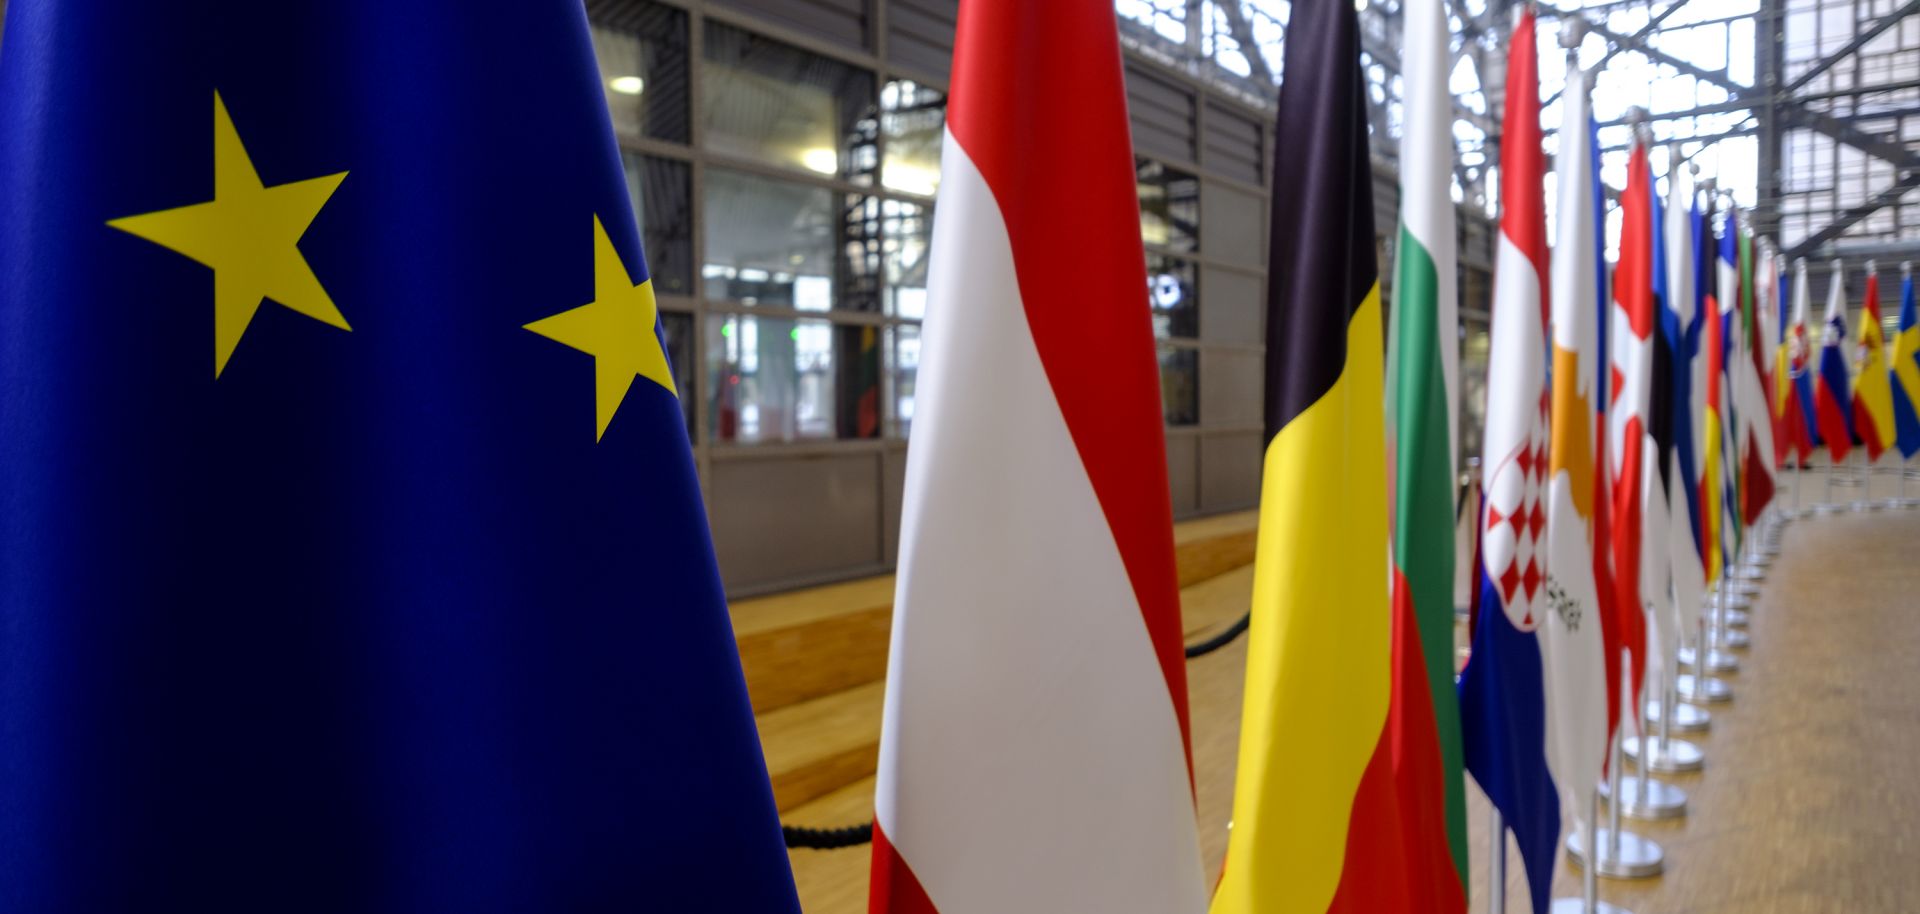 The atrium of the European Council headquarters on Feb. 24, 2022, in Brussels.